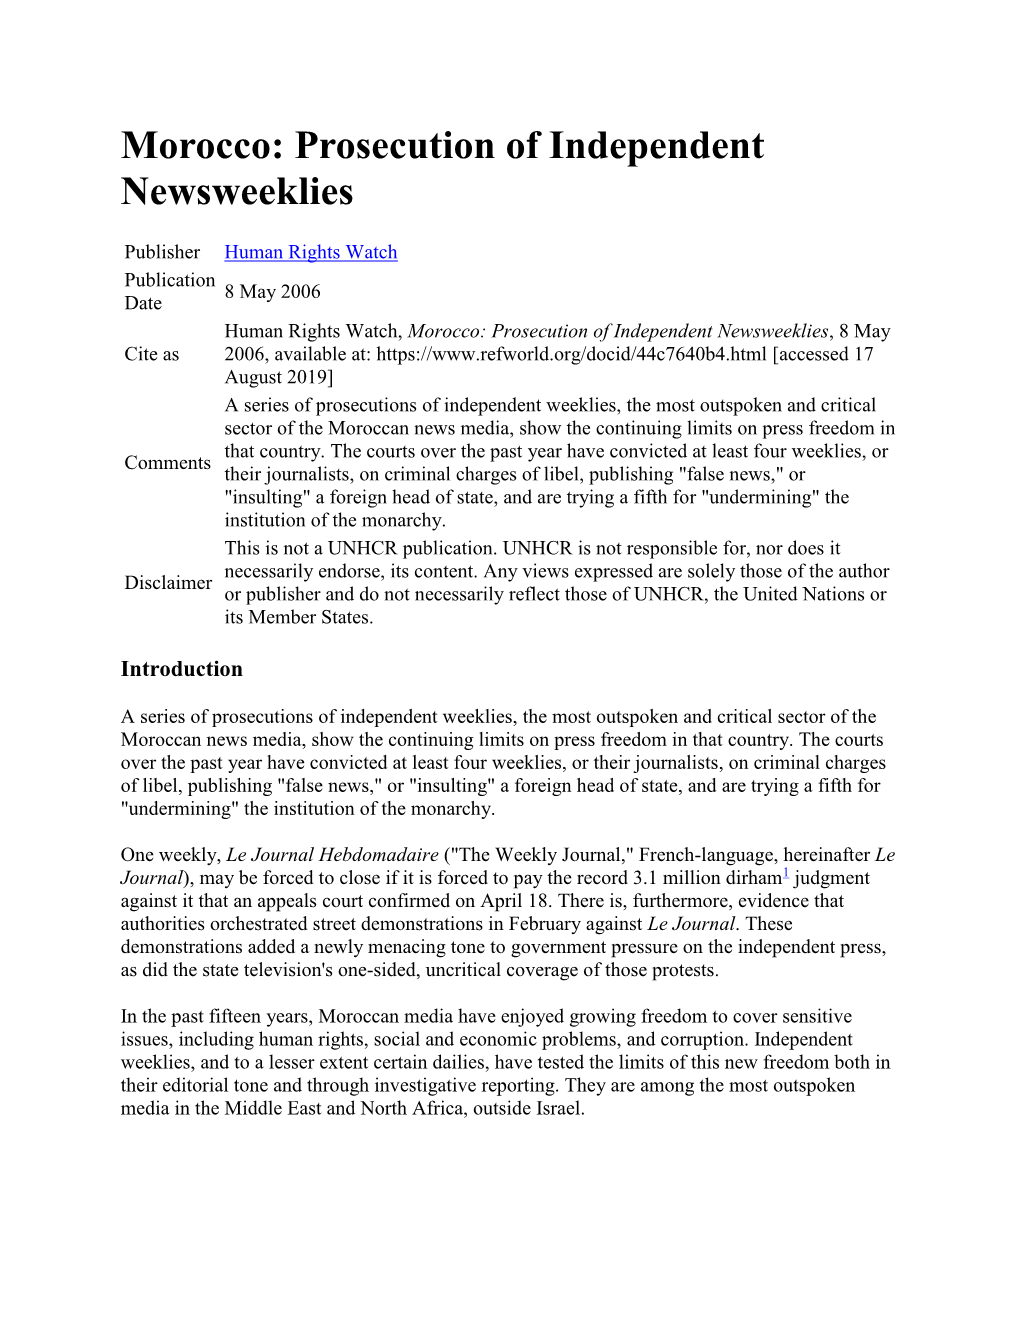 Prosecution of Independent Newsweeklies